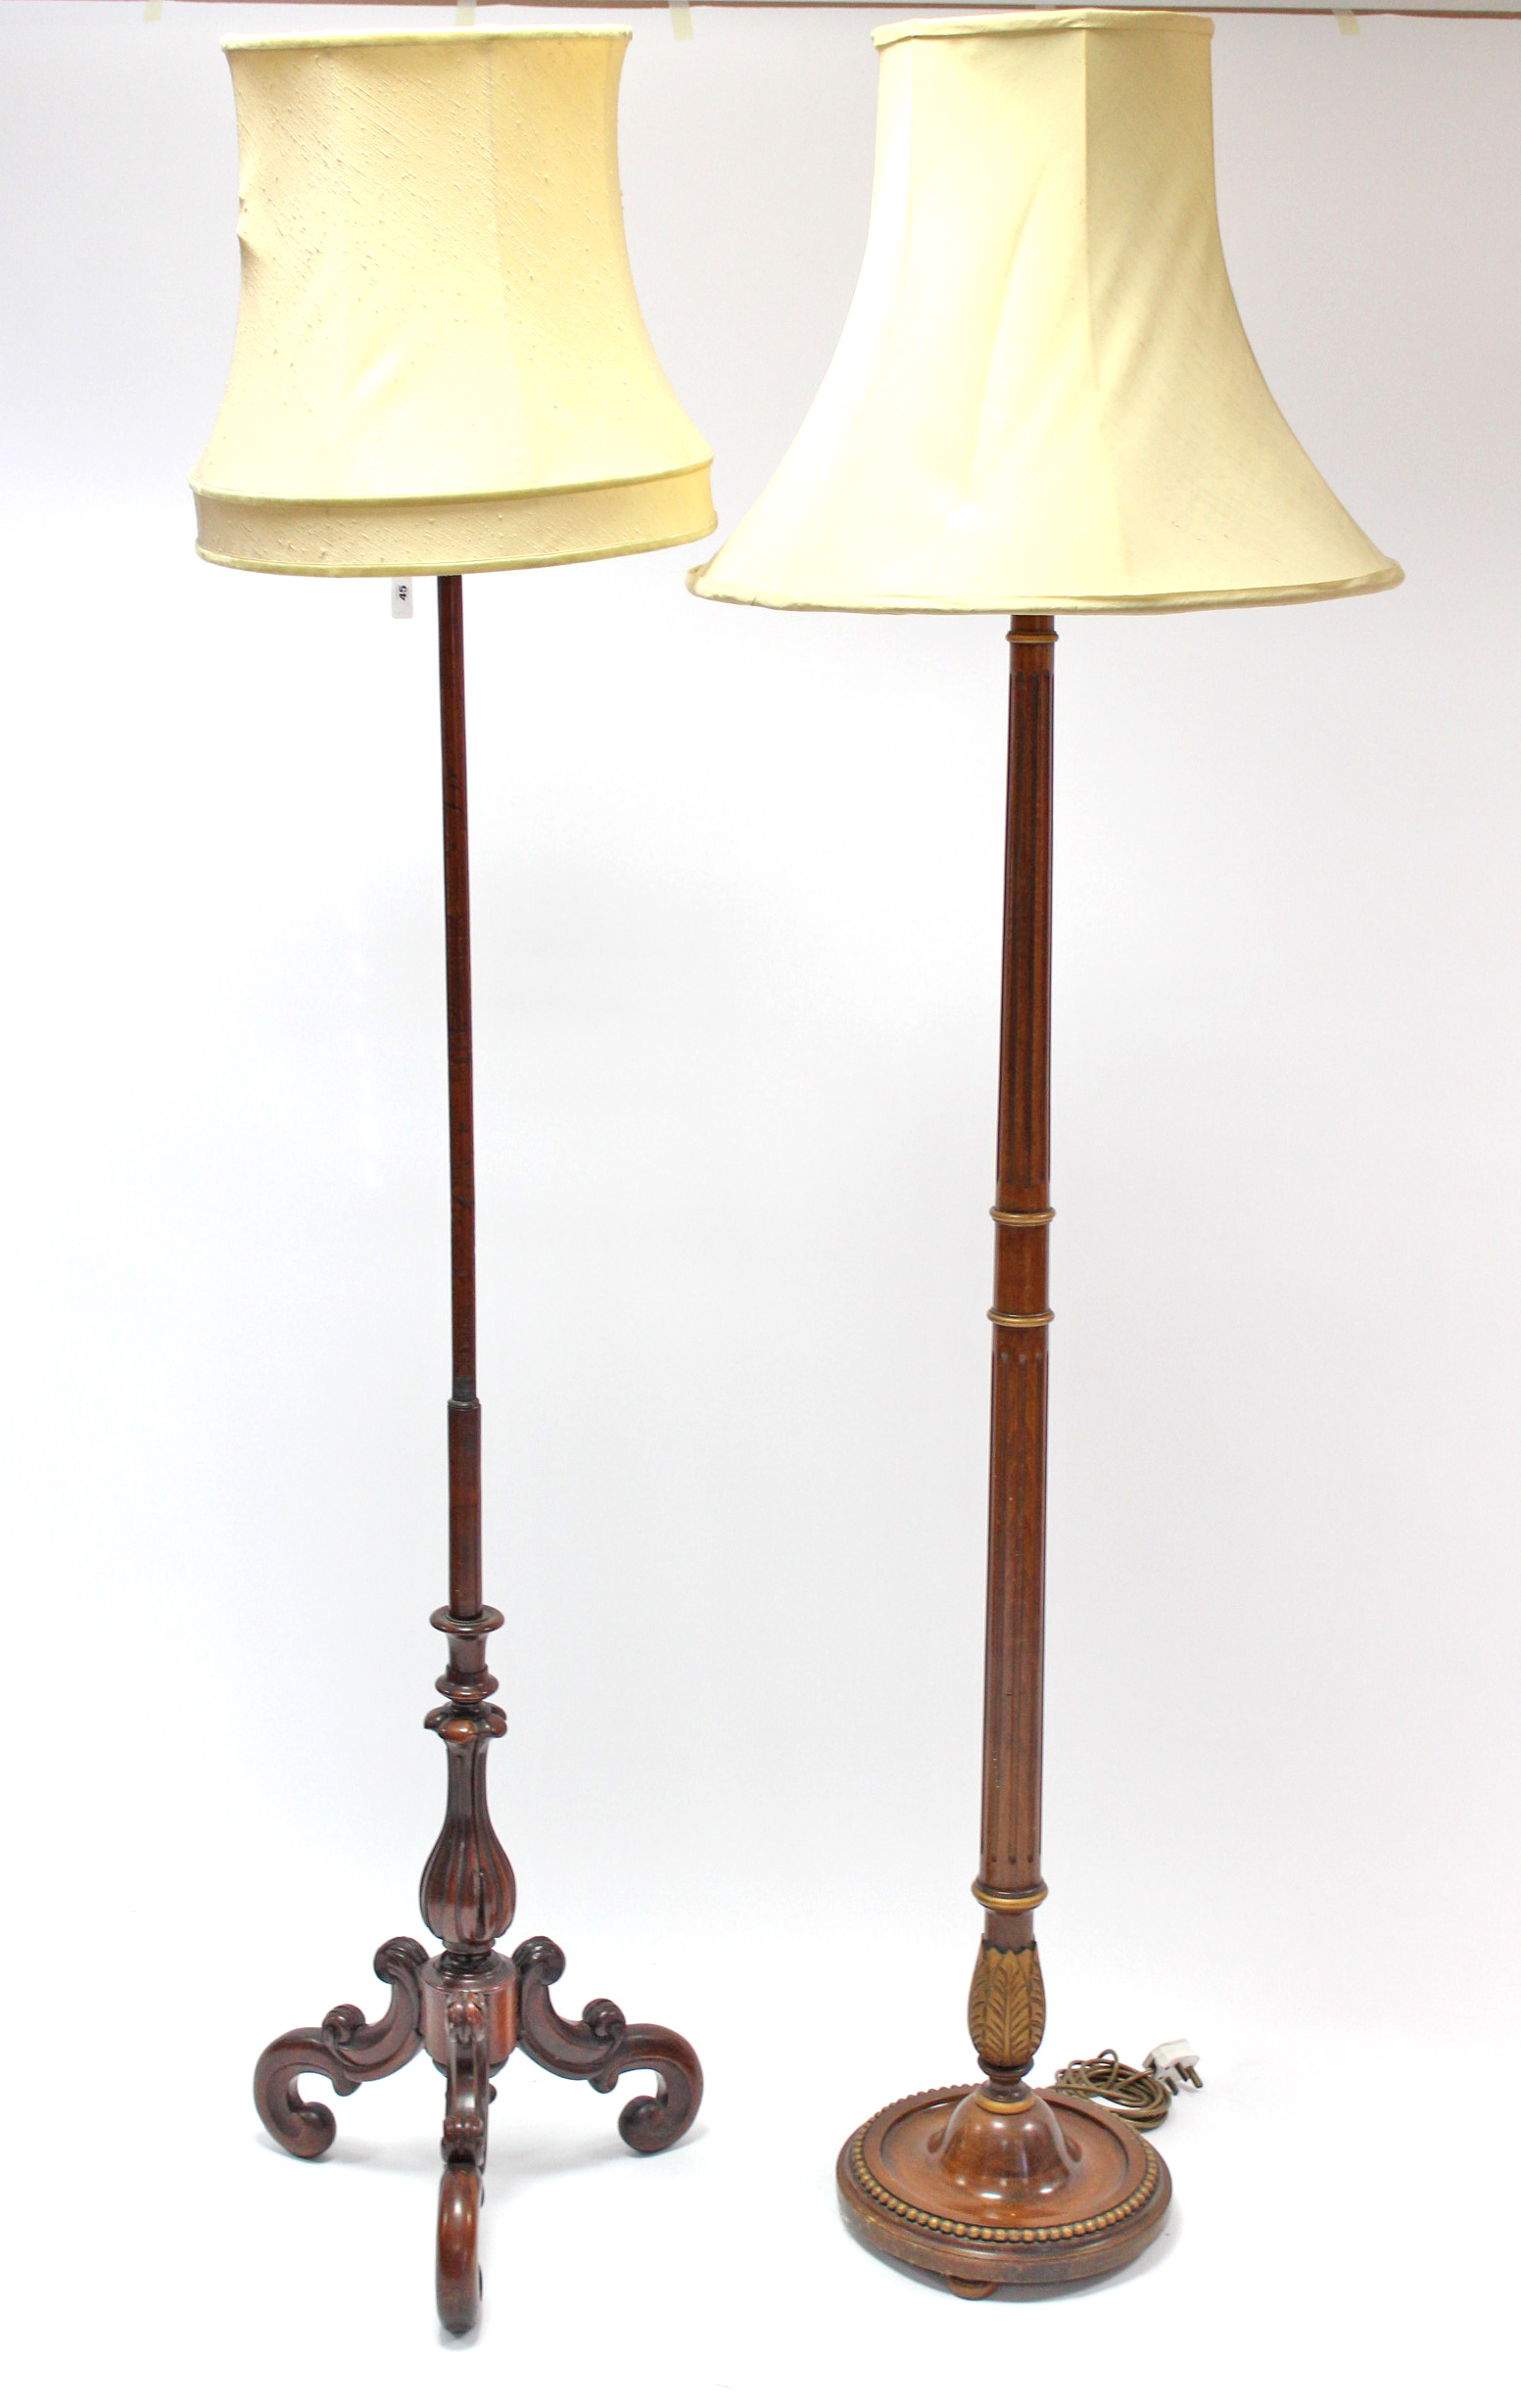 A 19th century mahogany pole-banner screen (converted to a standard lamp); together with another